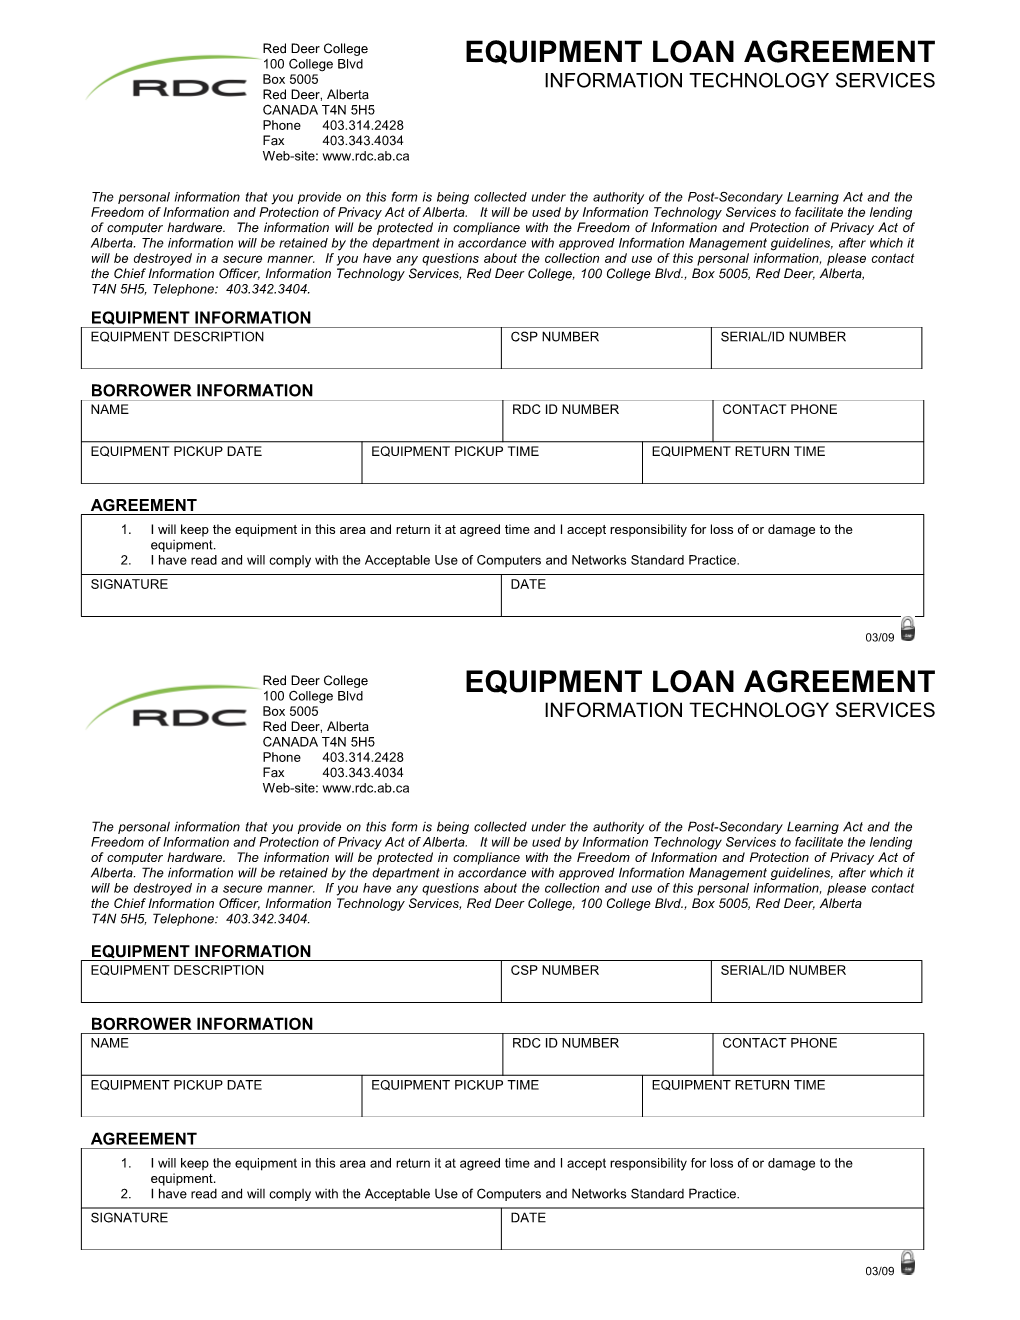 Equipment Loan Agreement - Information Technology Services